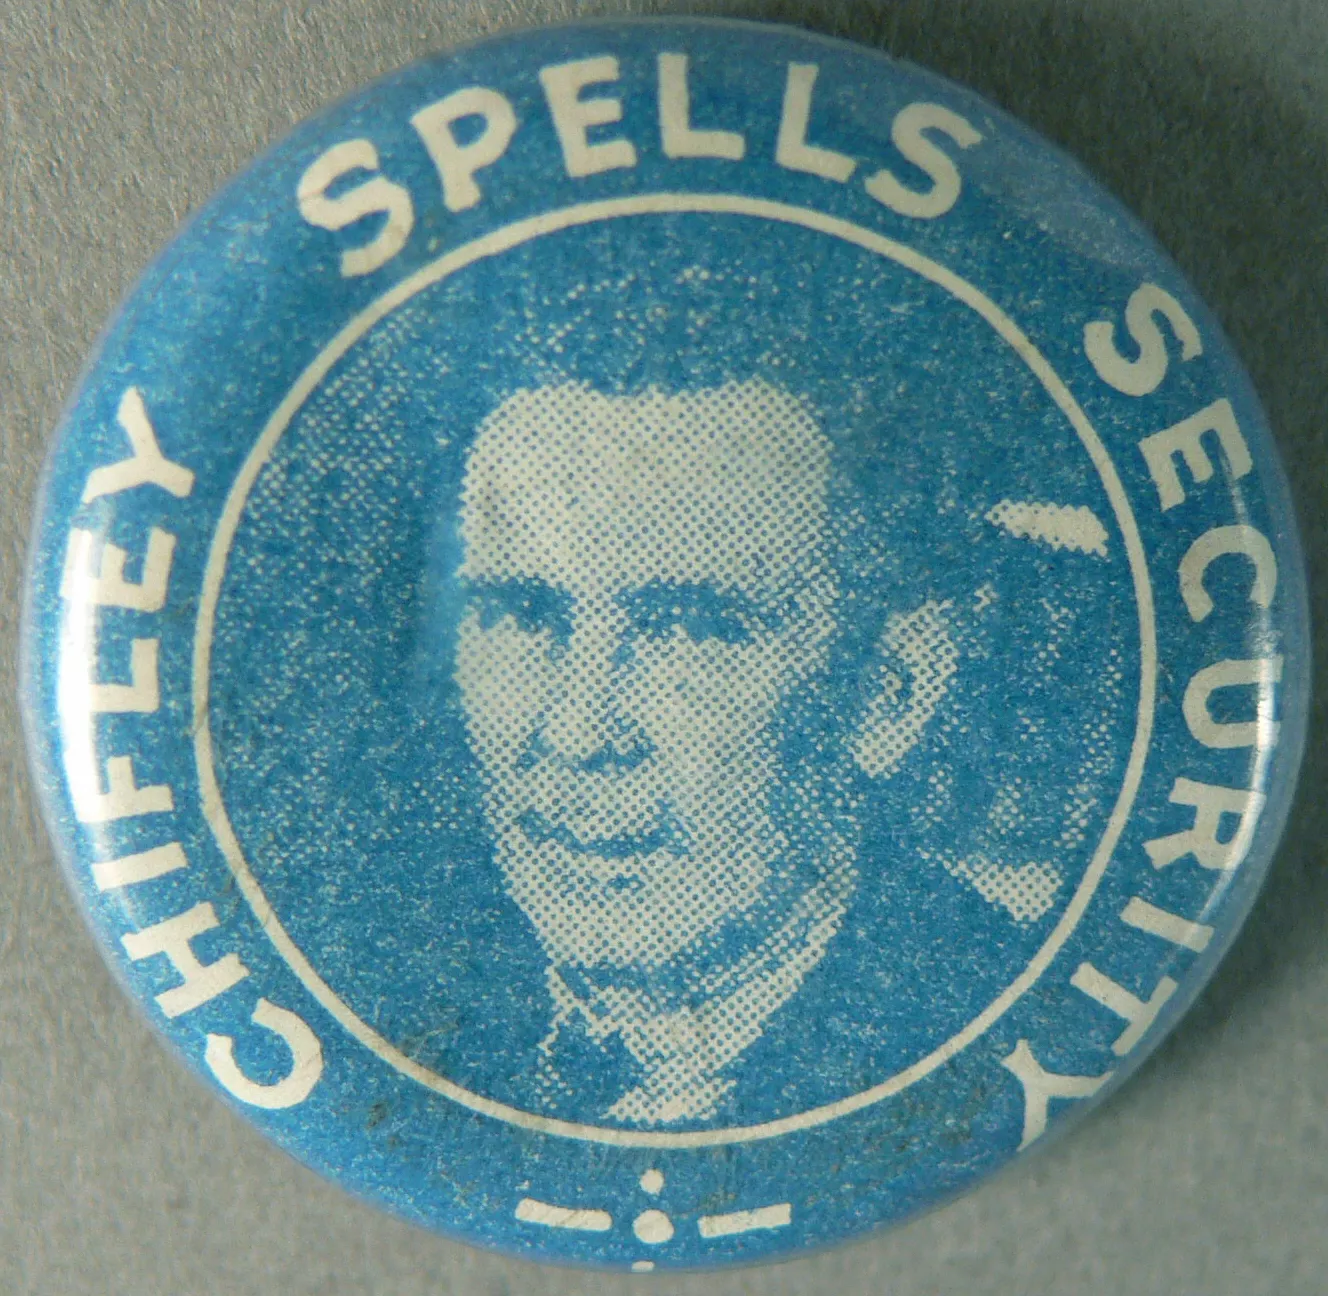 ‘Chifley spells security’ badge. Chifley’s down-to-earth appeal helped him successfully pass the social security referendum and the Labor party re-elected in 1946.